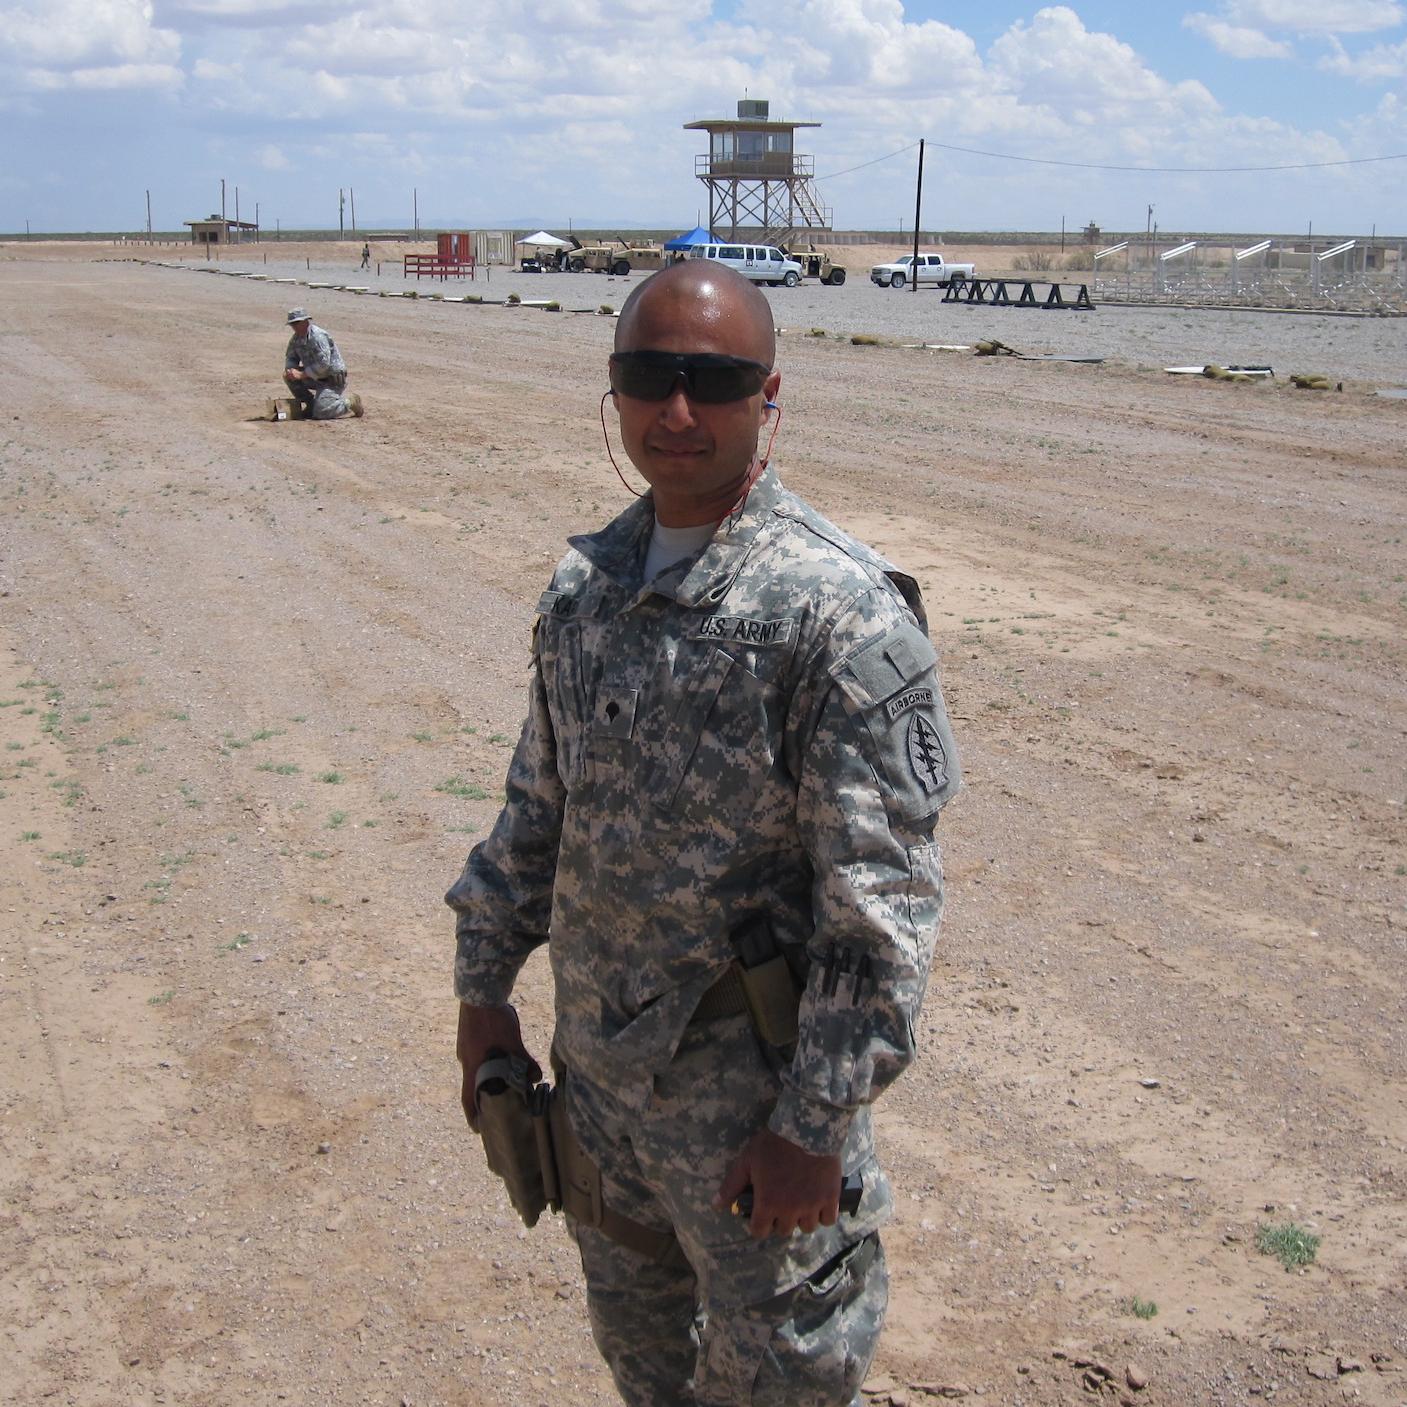 GSB student Preetam Karki served as a CBRN specialist in the United States Army. He was stationed with the Special Forces in Afghanistan and Pakistan. 